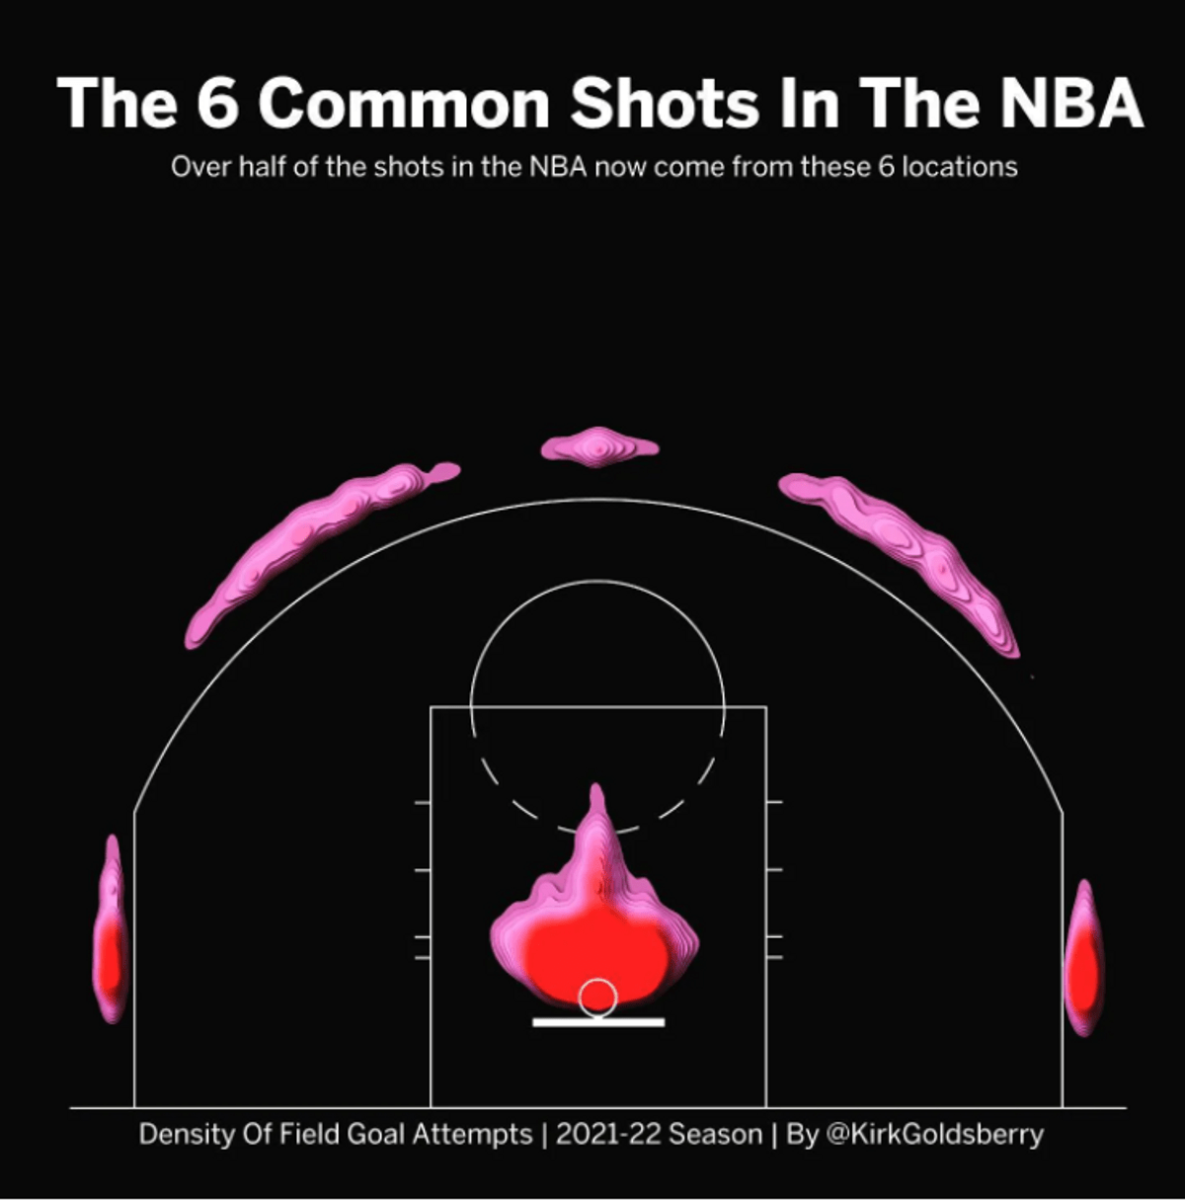 The 6 Most Common Shots In The NBA: Is The Mid-Range Dead?